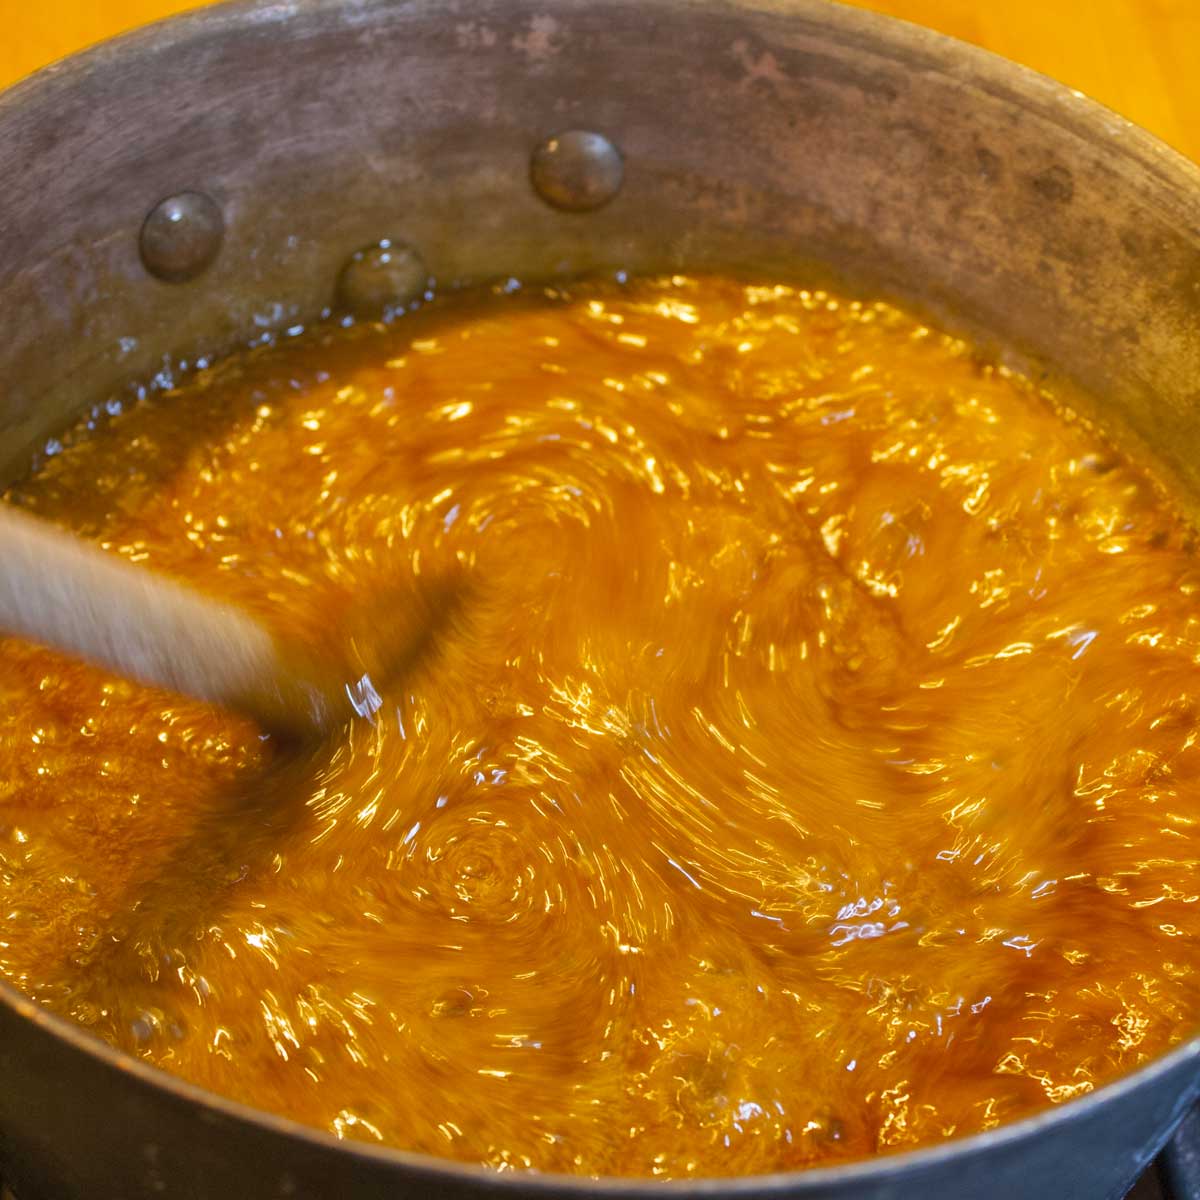 Boil Sticky Toffee Sauce 1-2 minutes